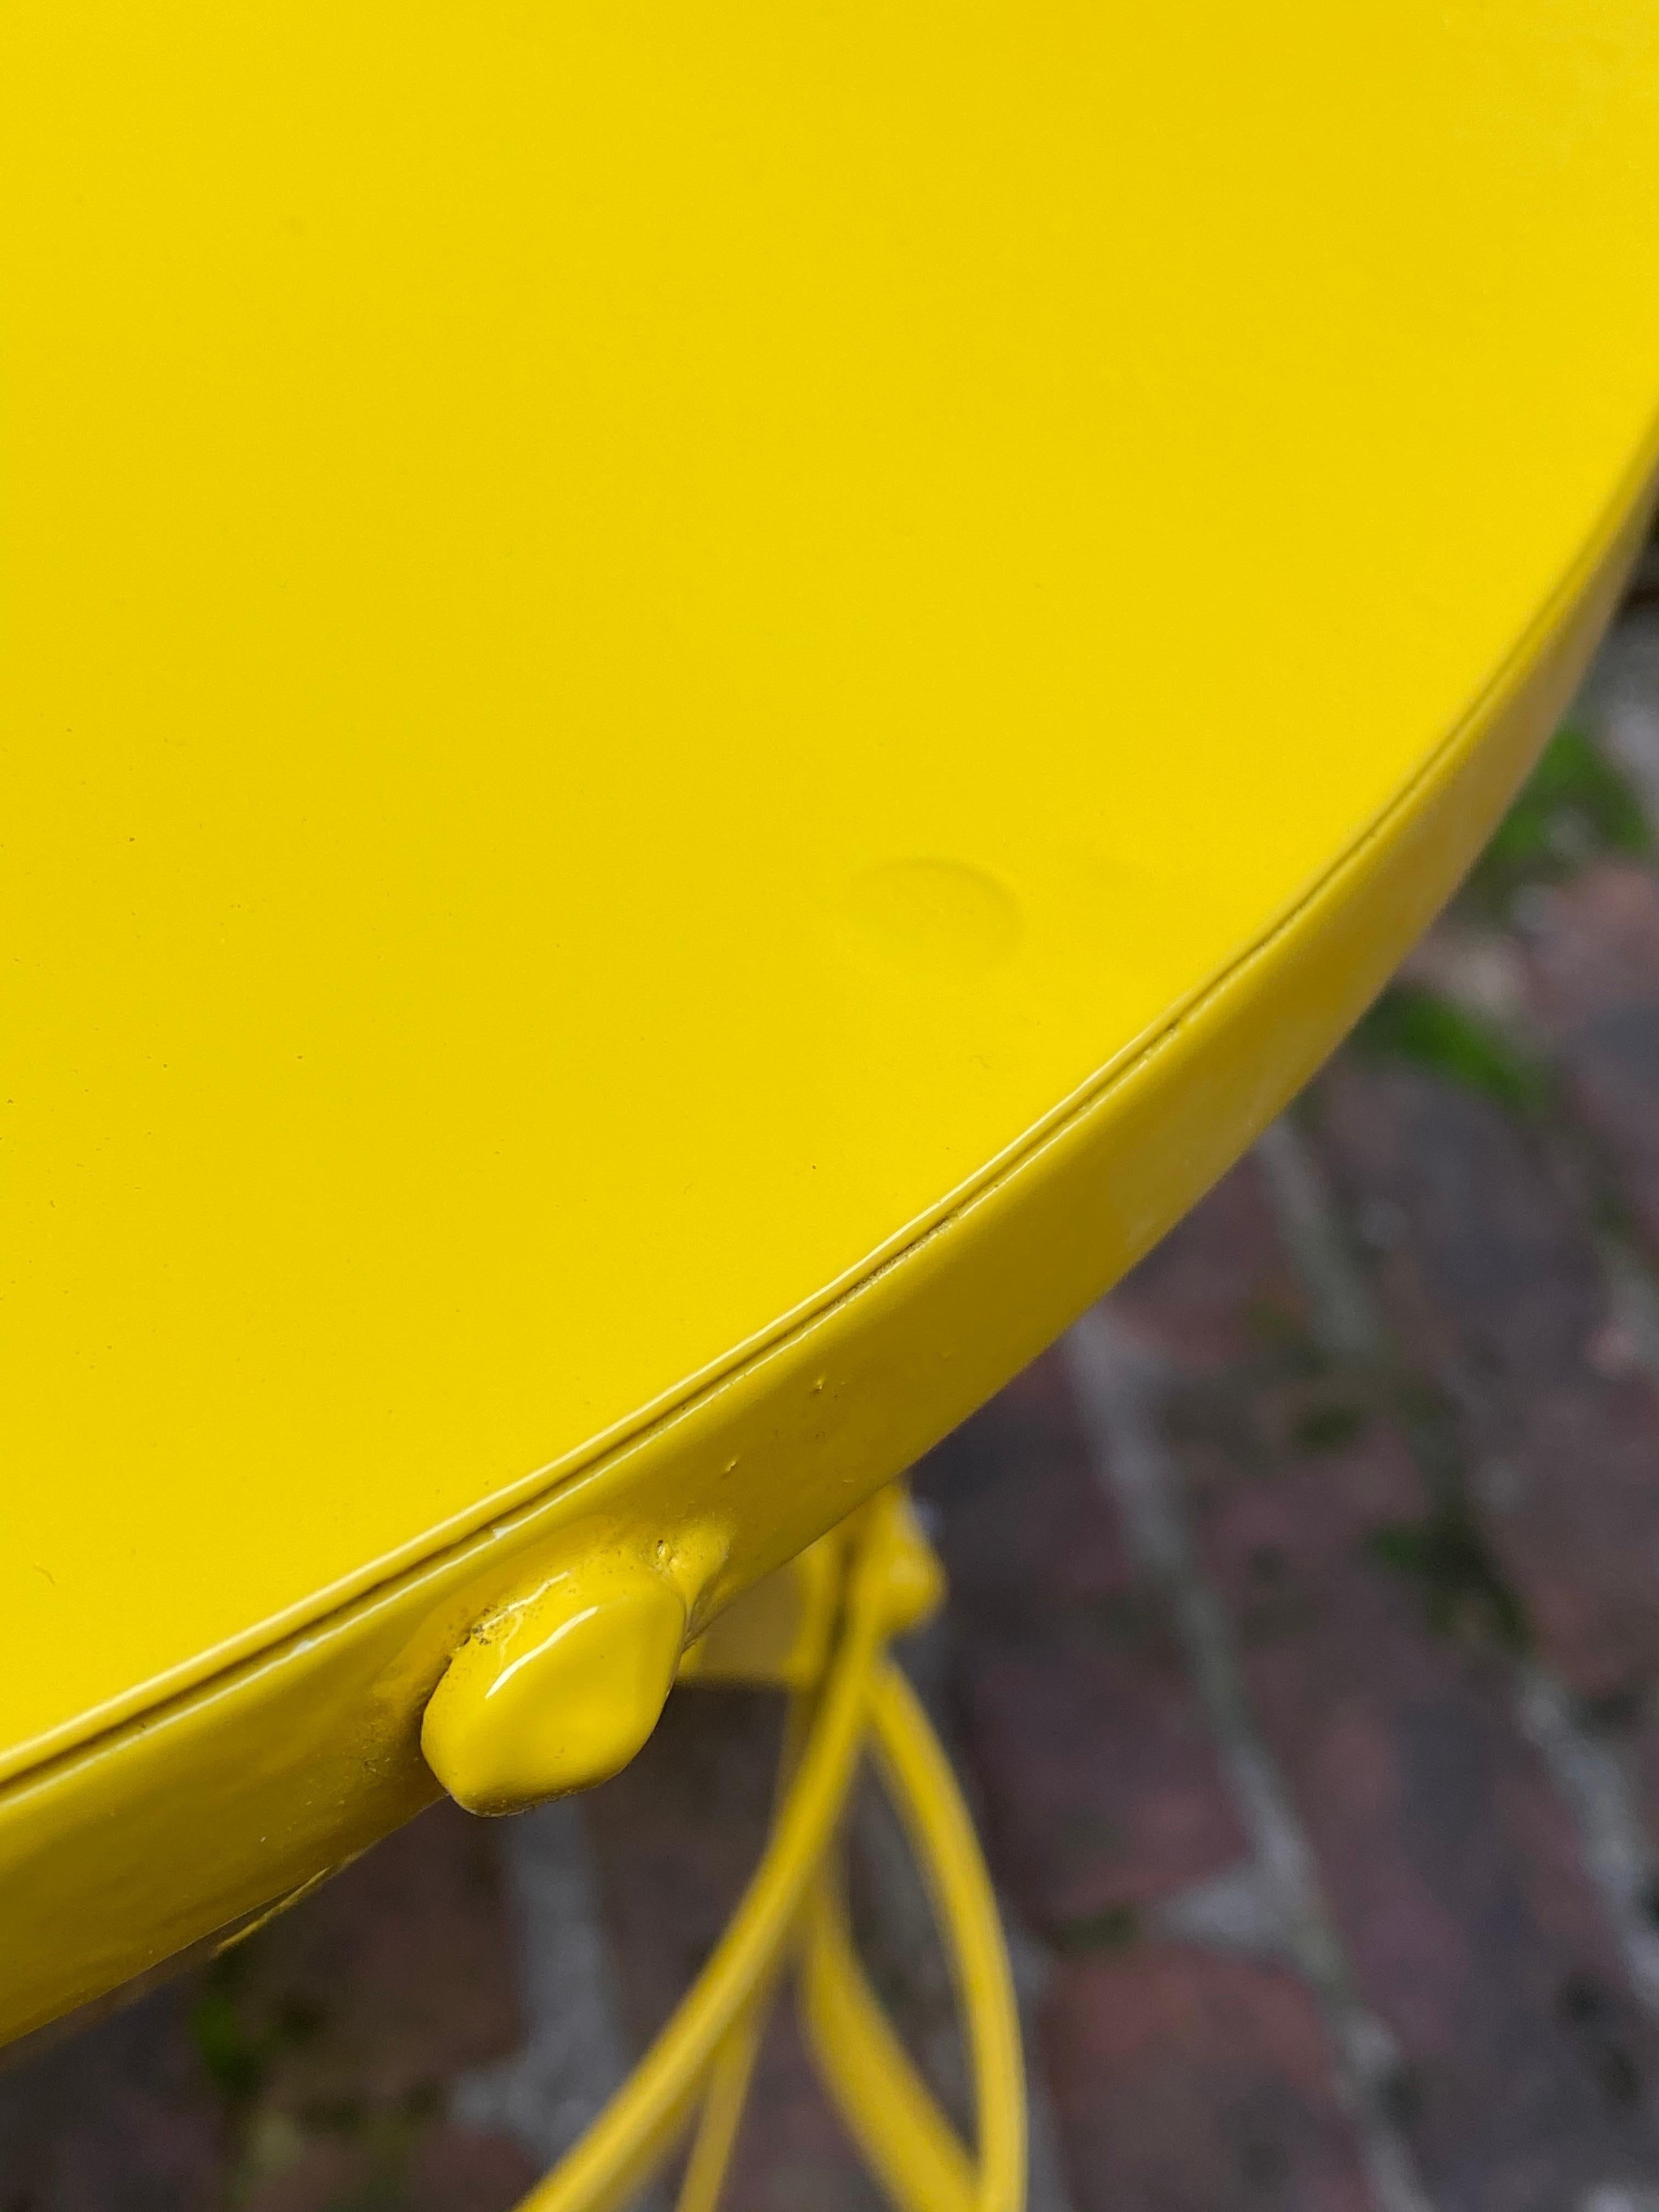 Strap Metal Canary Yellow Drum Table, 1960s For Sale 2